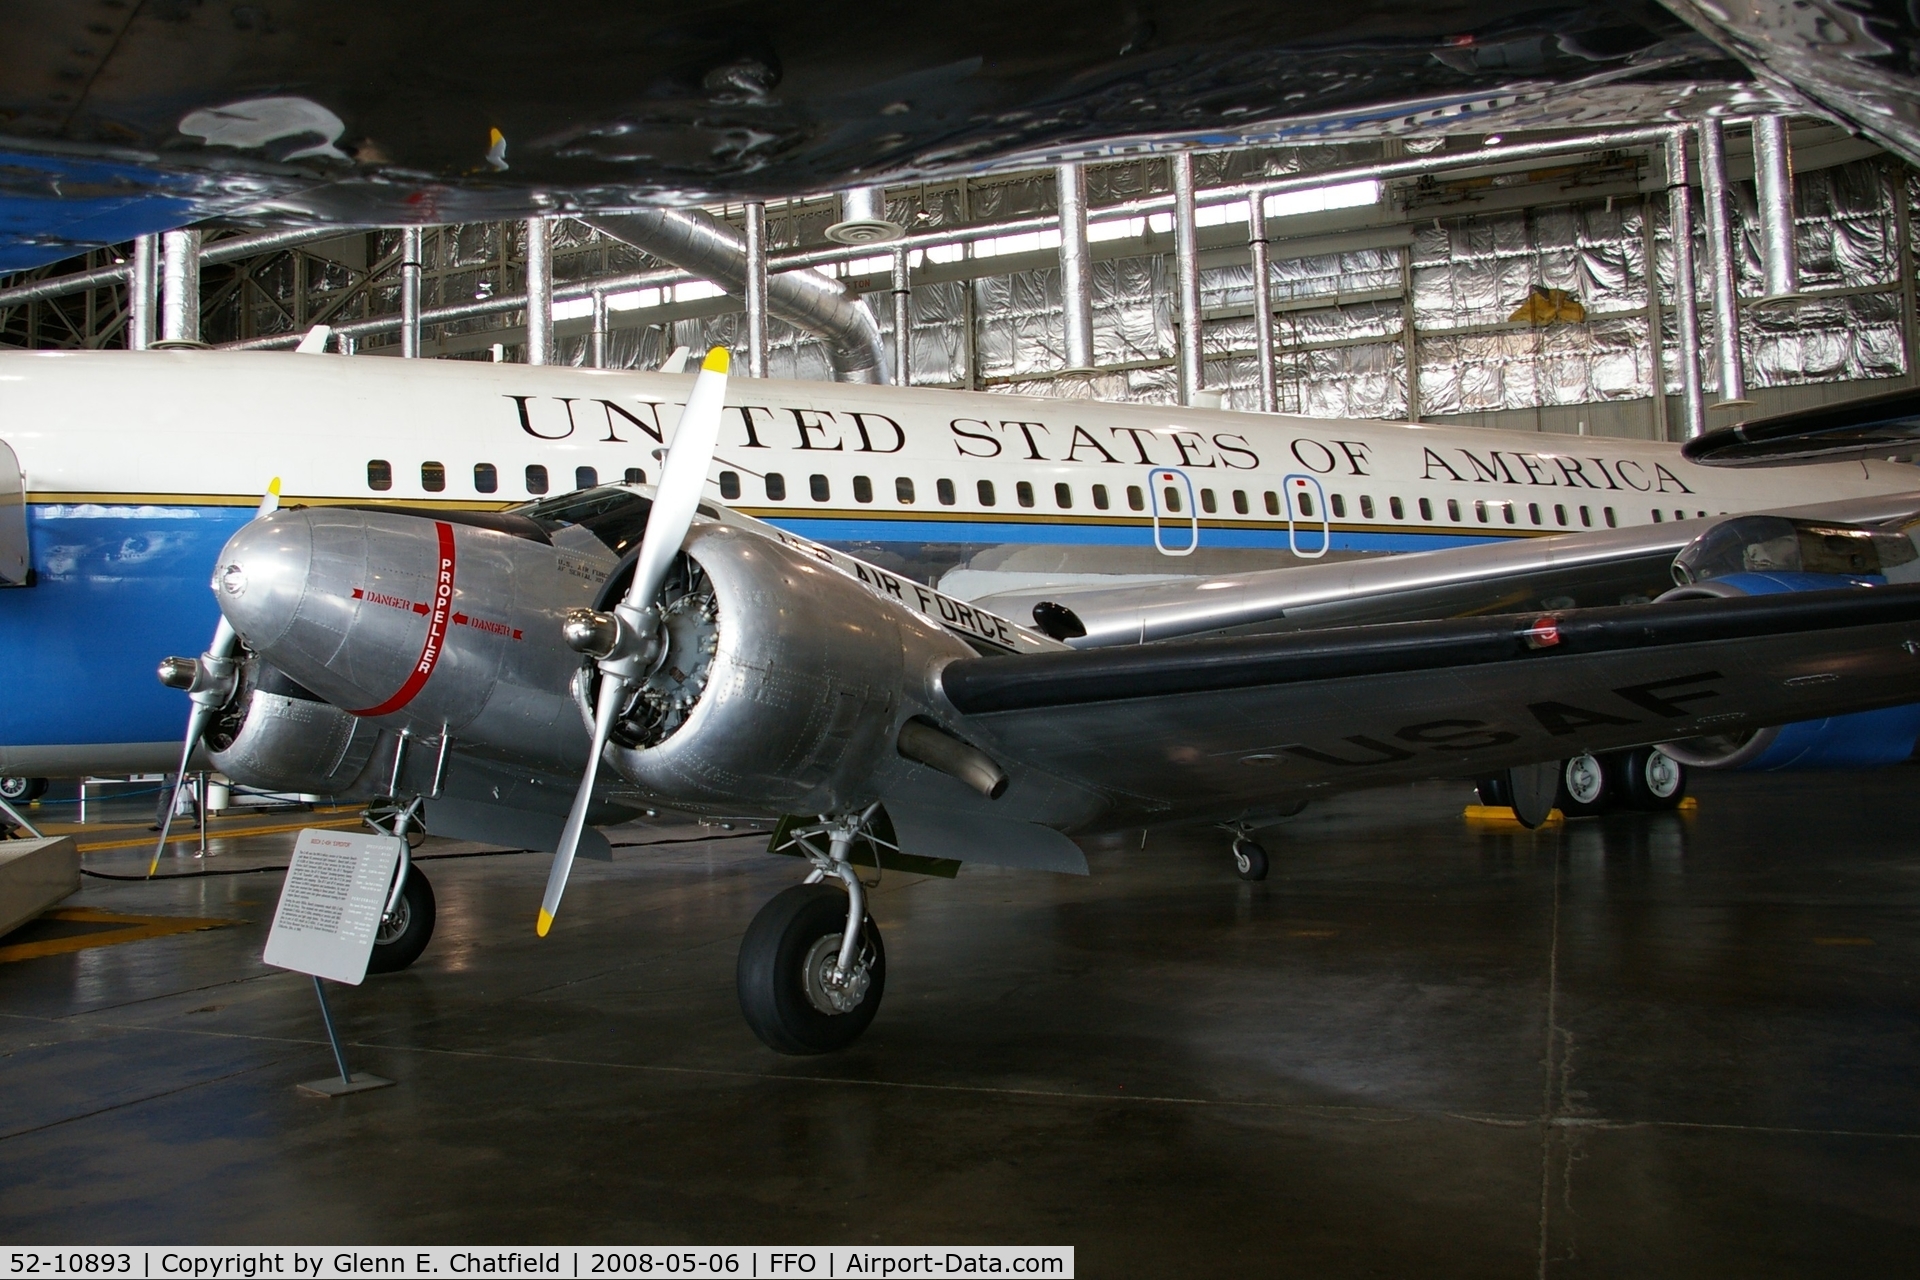 52-10893, 1952 Beech C-45H Expeditor C/N AF-823, Sitting in the hangar with Presidential aircraft, at the National Museum of the U.S. Air Force